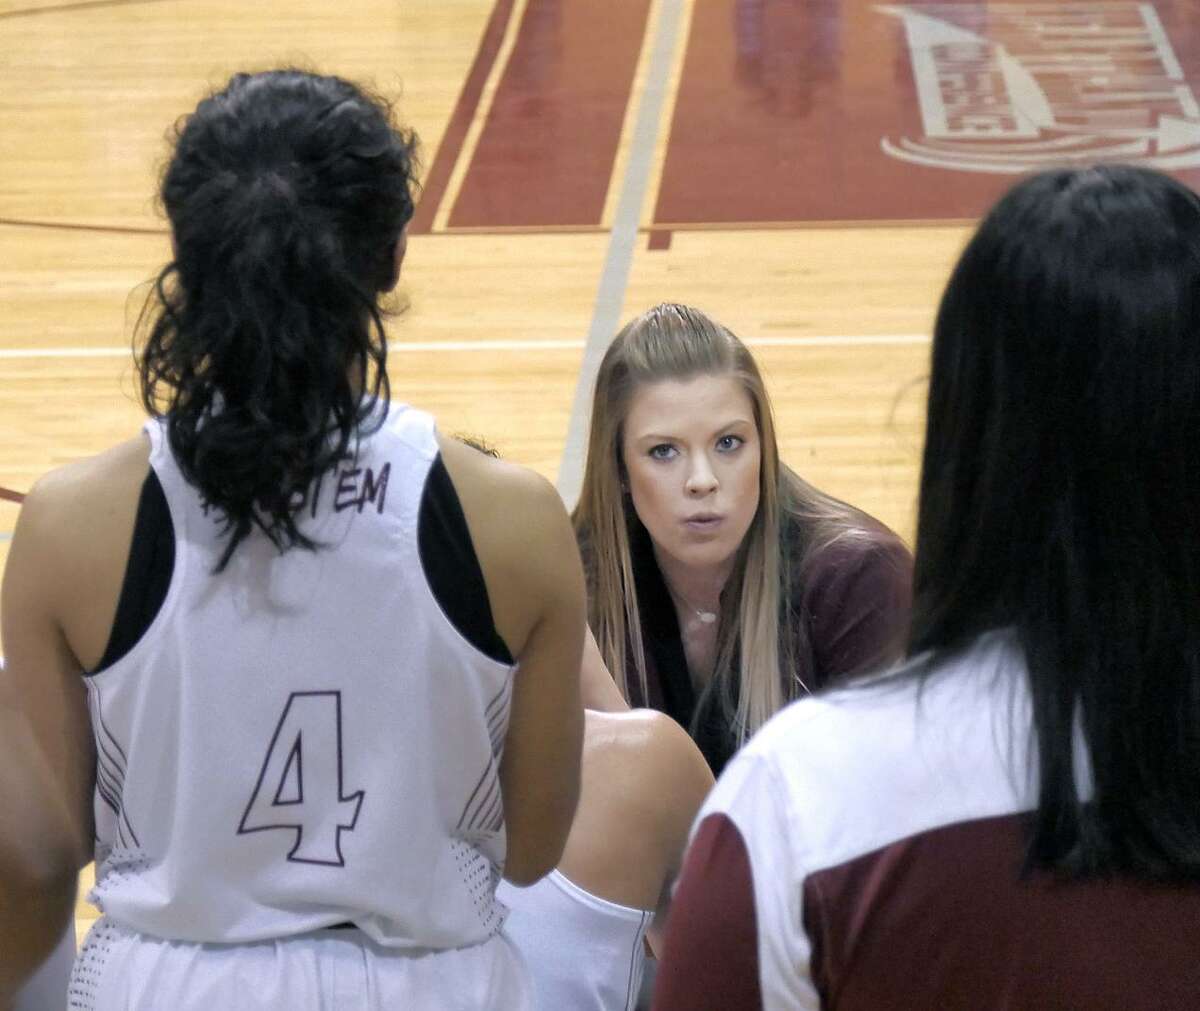 Assistant coach Tori Tucker will finish the season for the second straight year leading the Dustdevils after being named interim head coach this week following Jeff Caha’s firing.